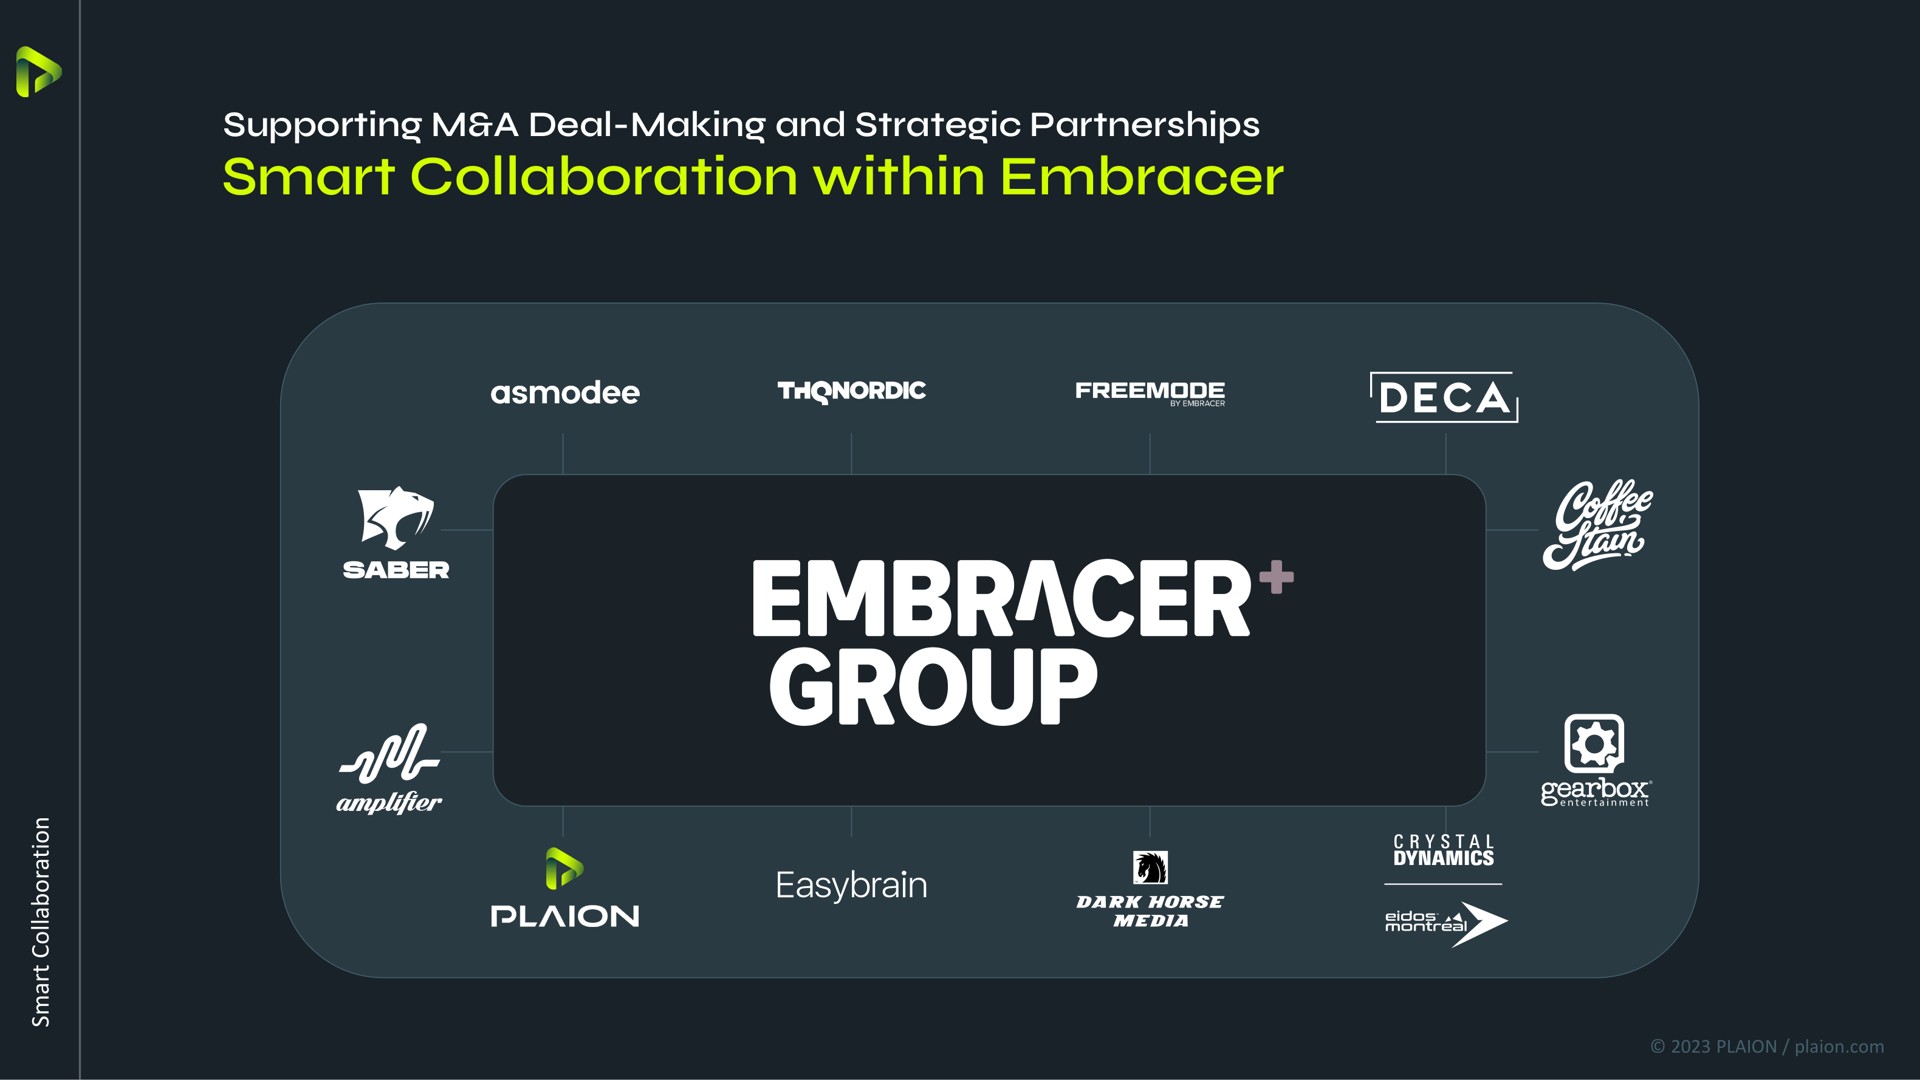 smart collaboration within embracer group ree | Embracer Group